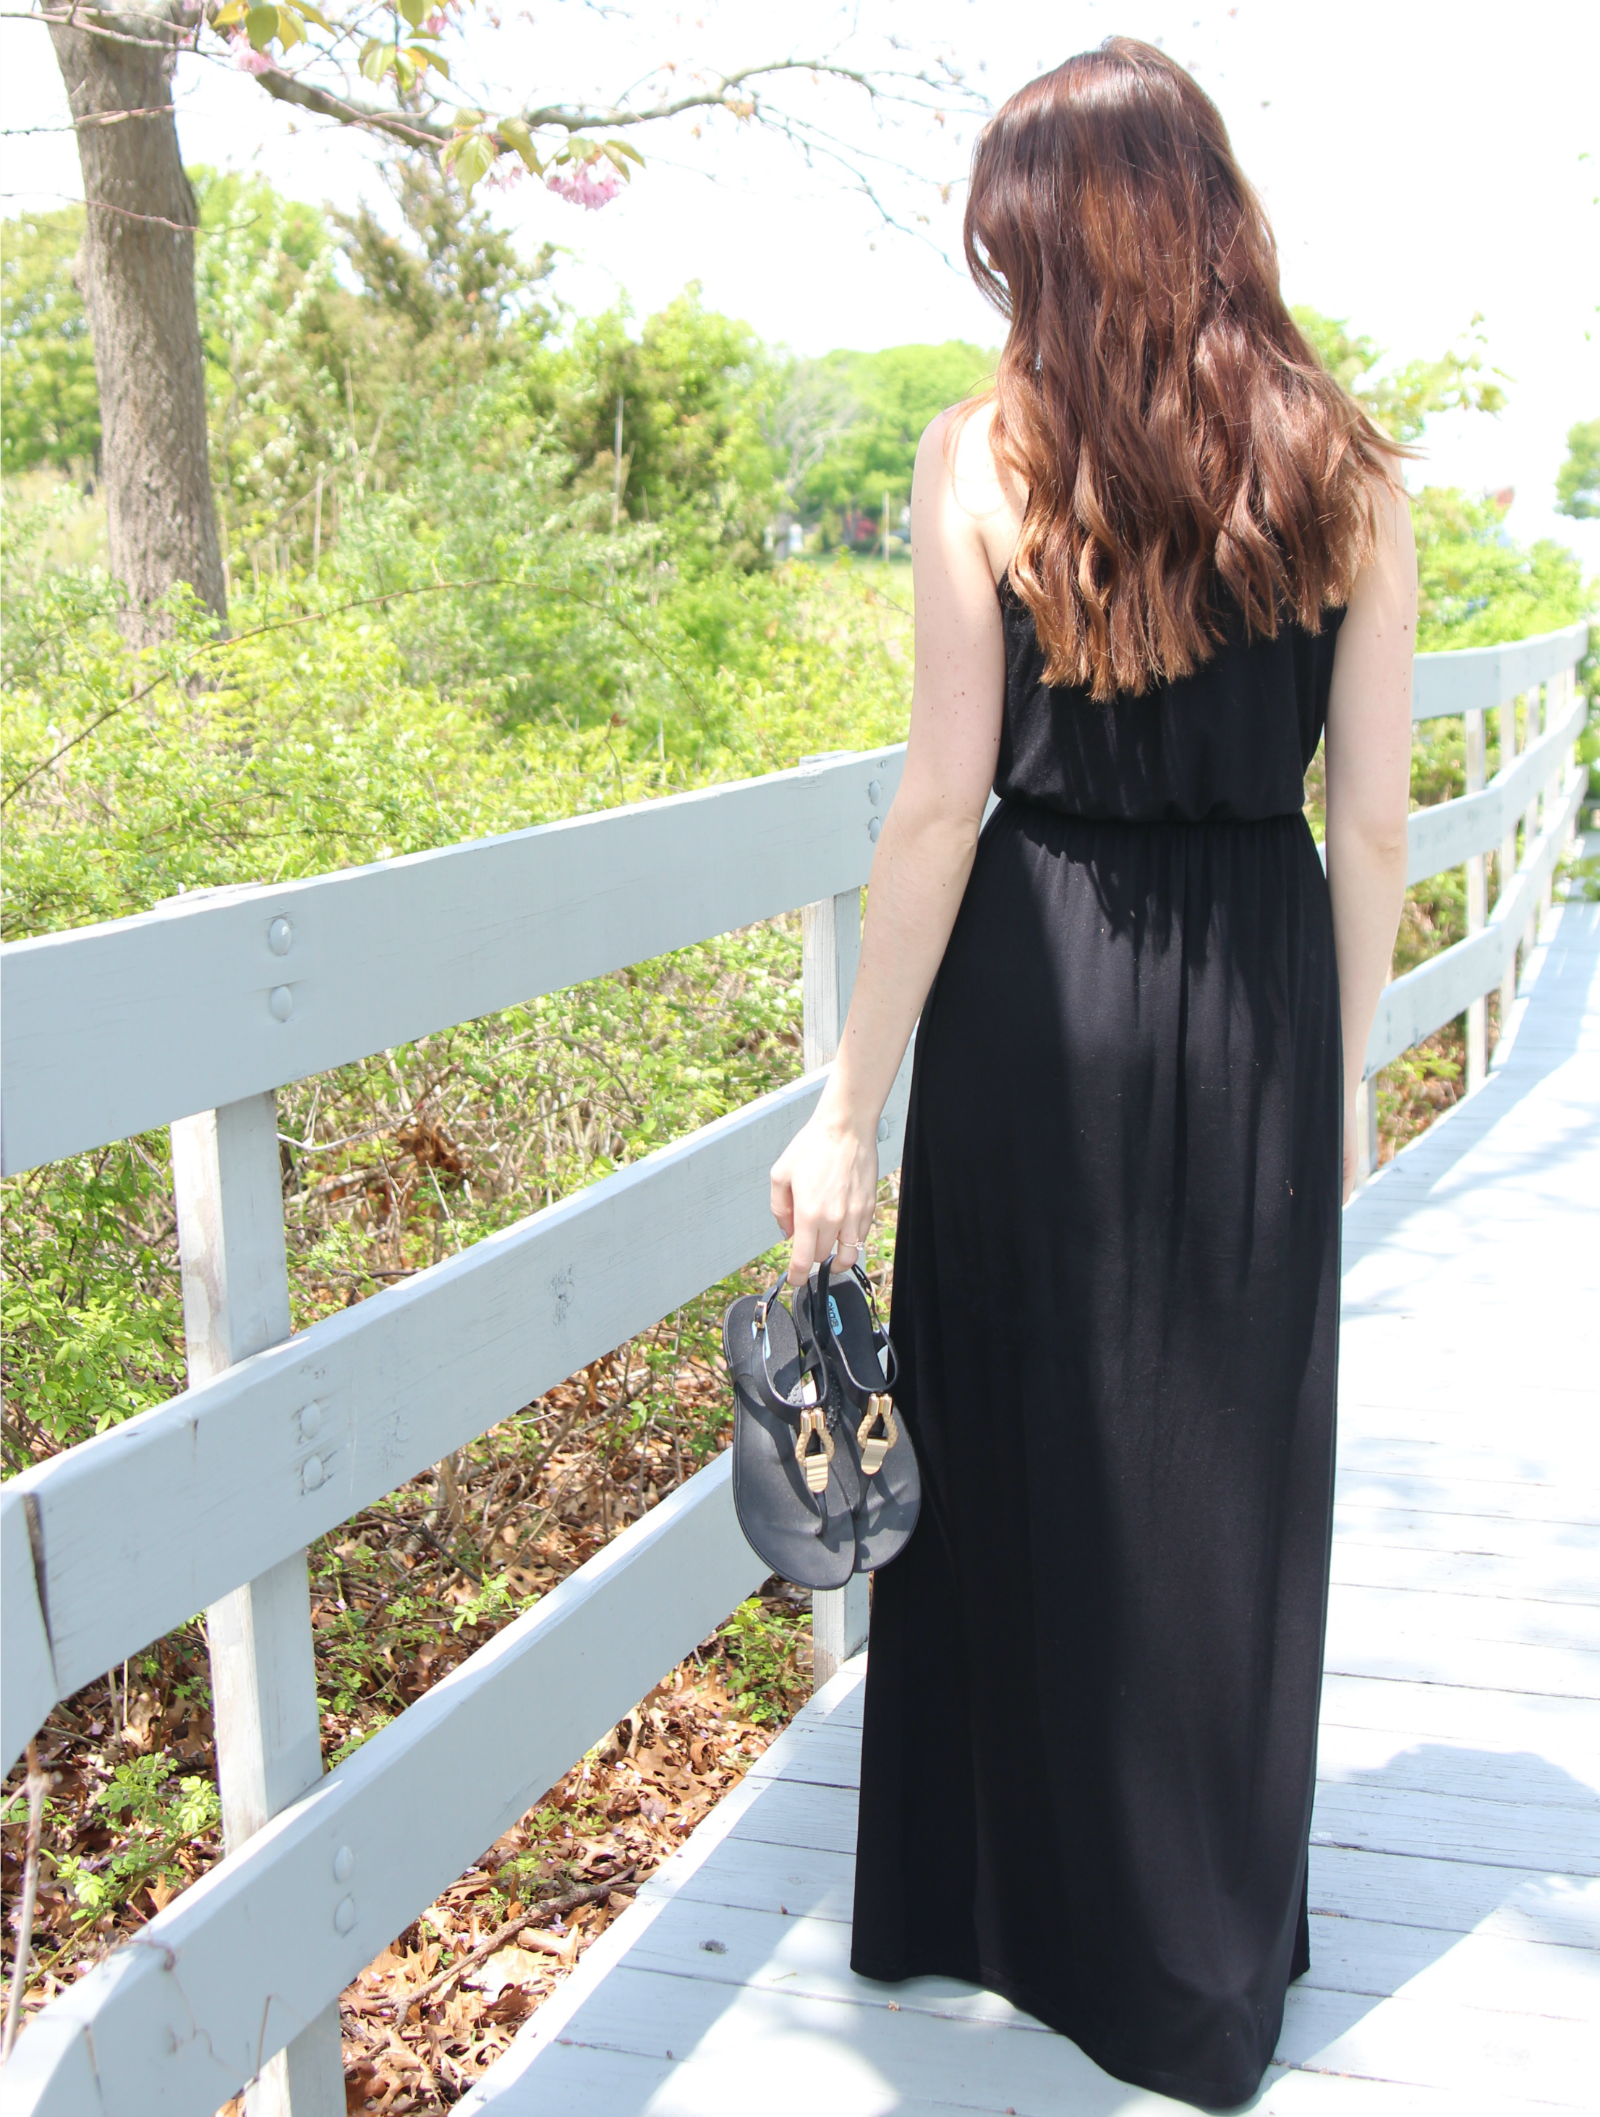 OkaB Sandals - Connecticut Style Blogger